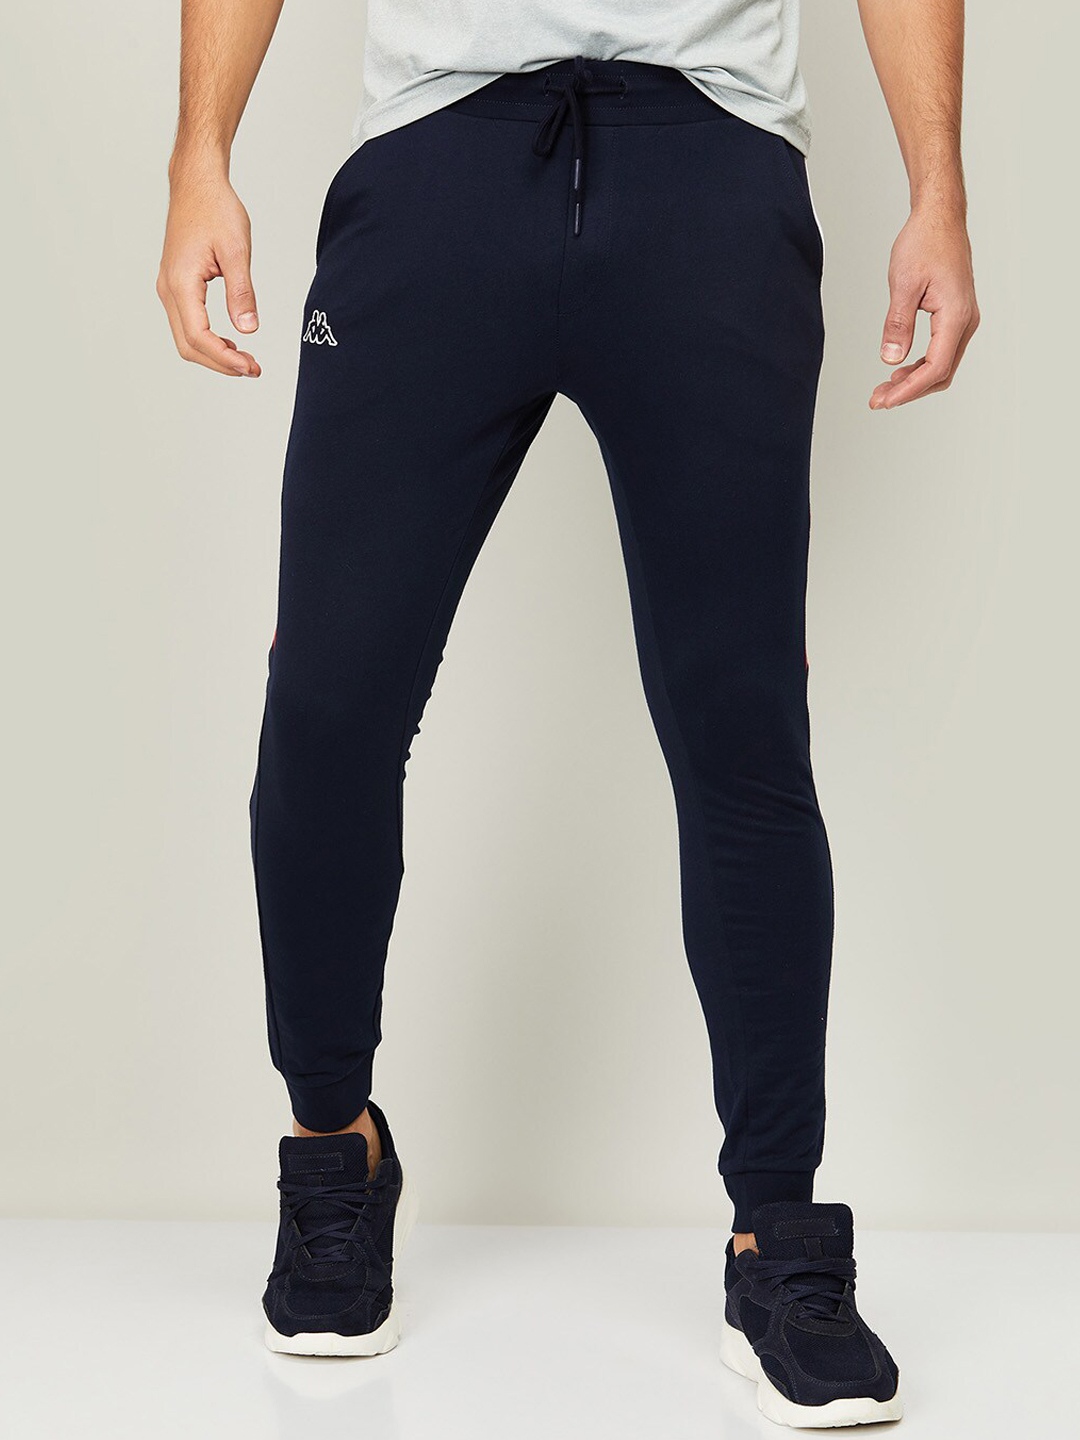 Kappa Men Navy Blue Solid Slim-Fit Joggers - buy at the price of $9.06 ...